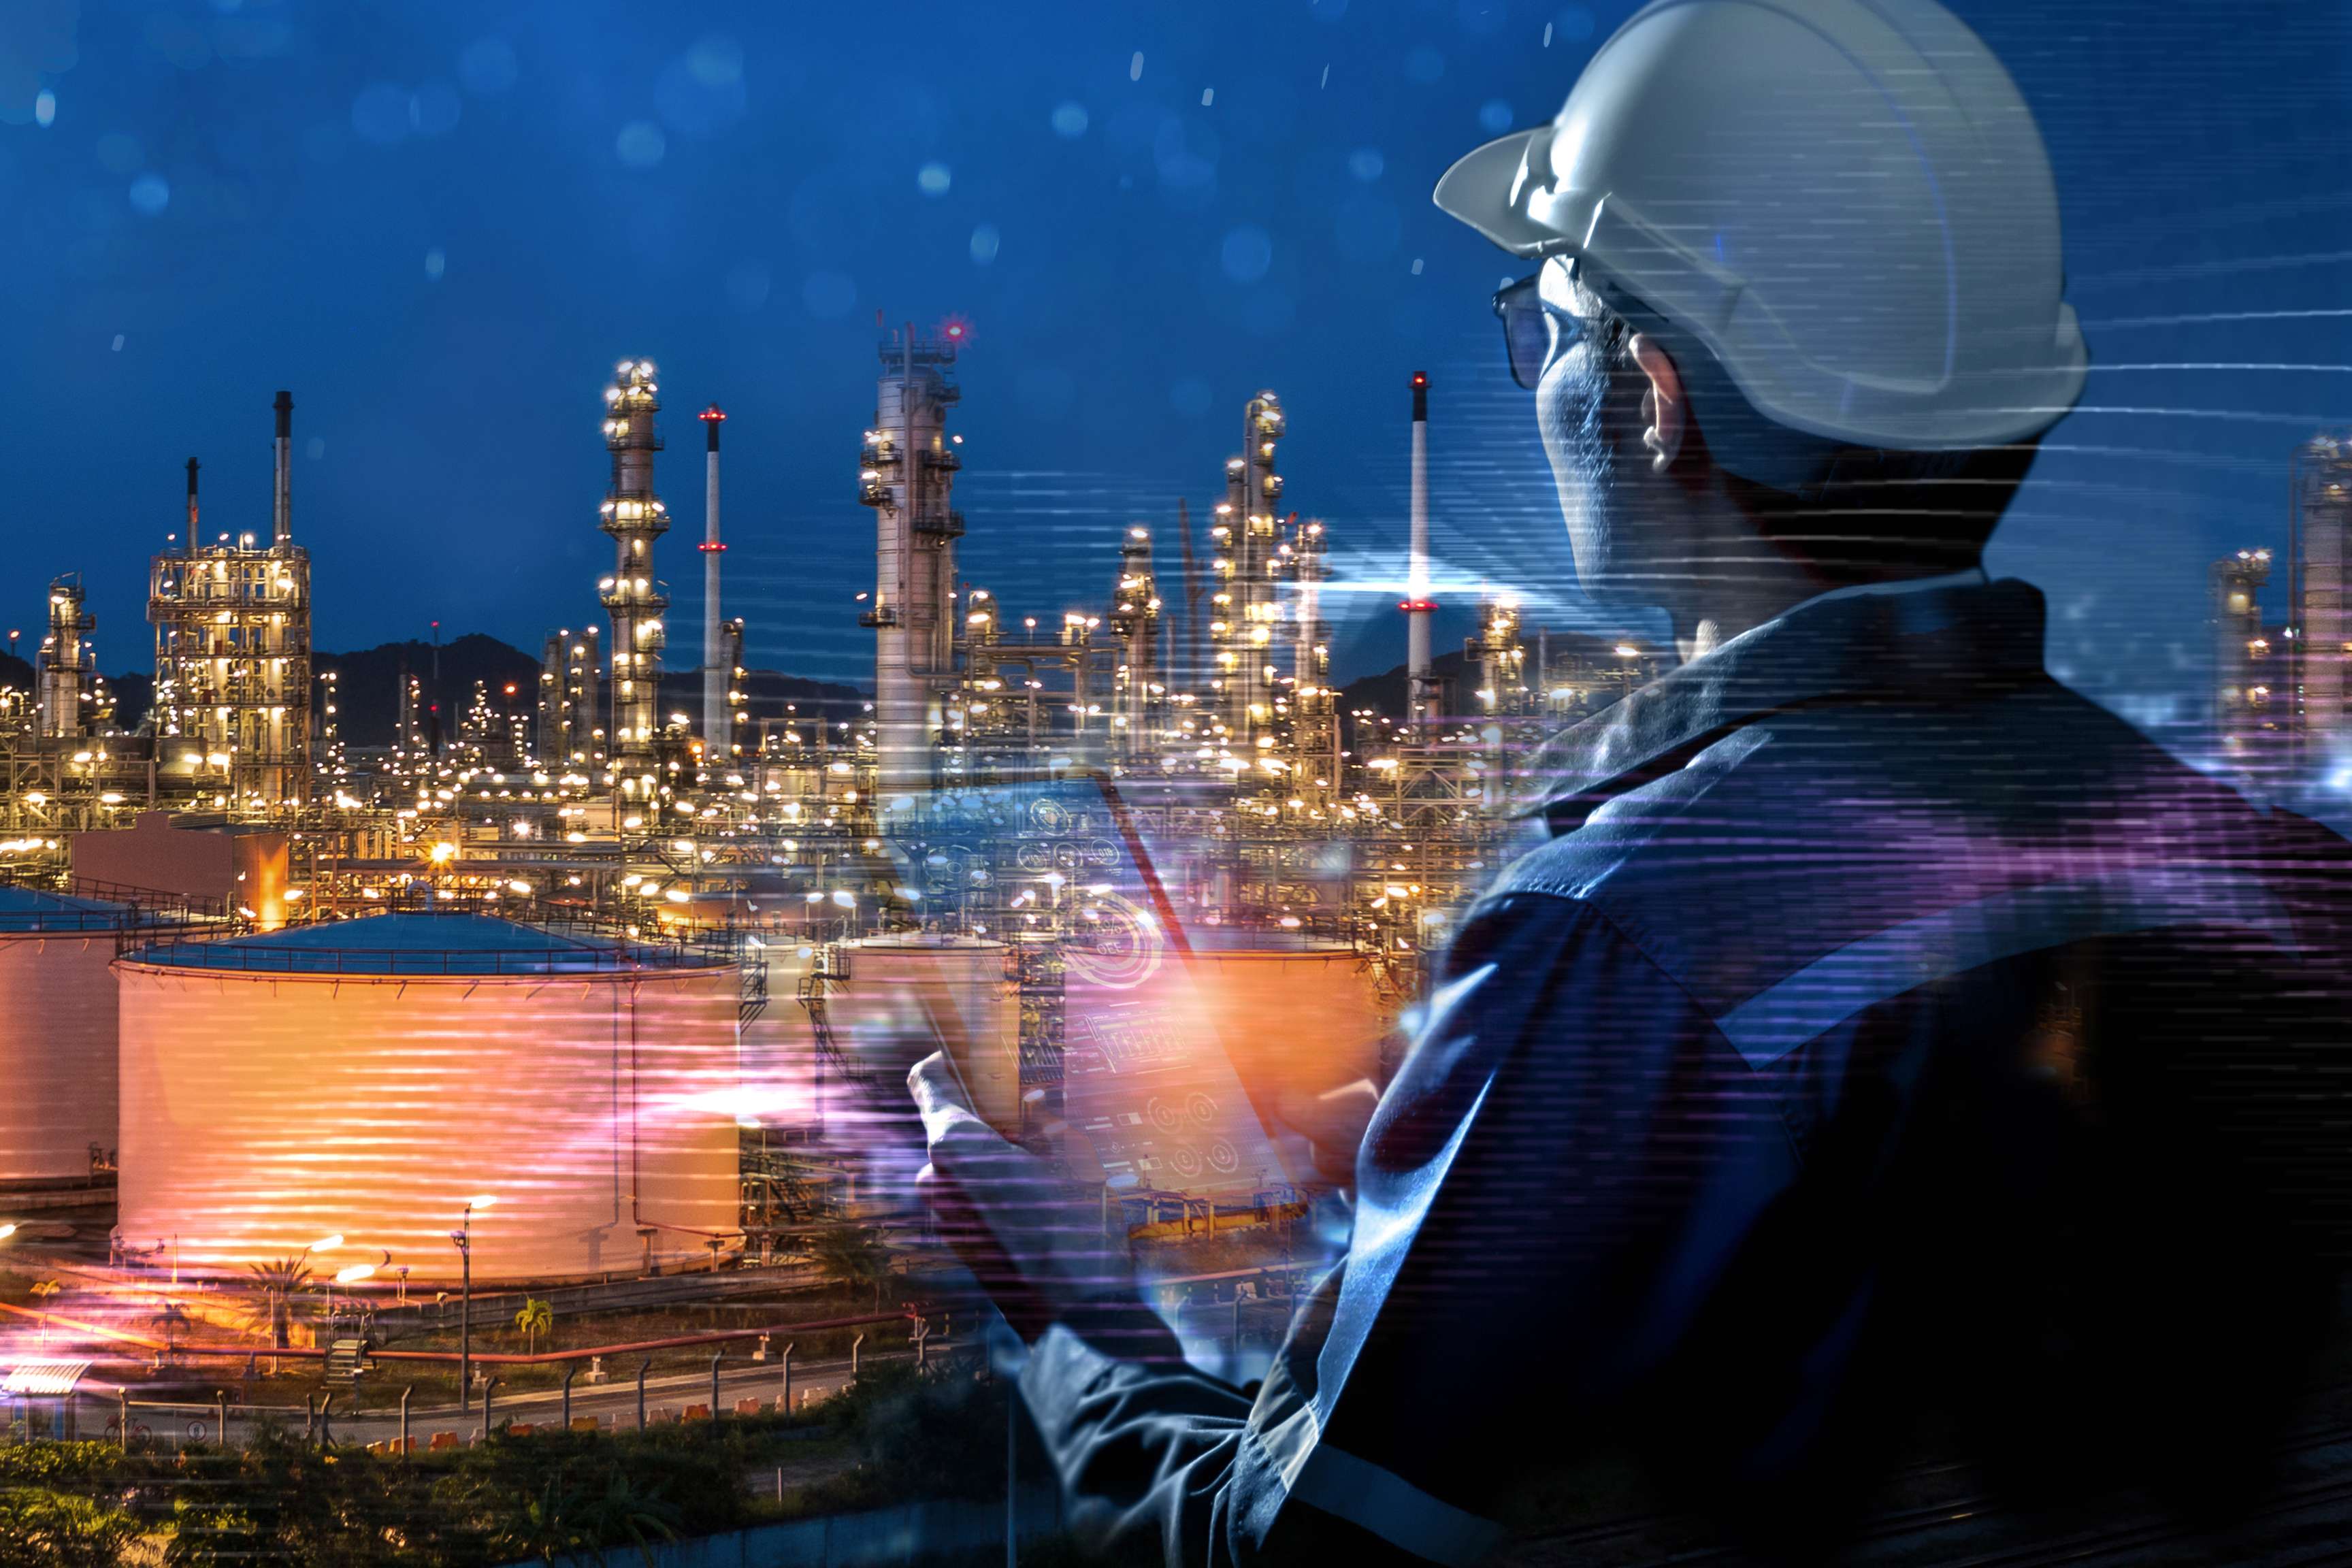 Refinery site in the dark with many lights shining on it and a man in the foreground looking towards the refinery site, wearing a safety helmet and holding a tablet in his hand.